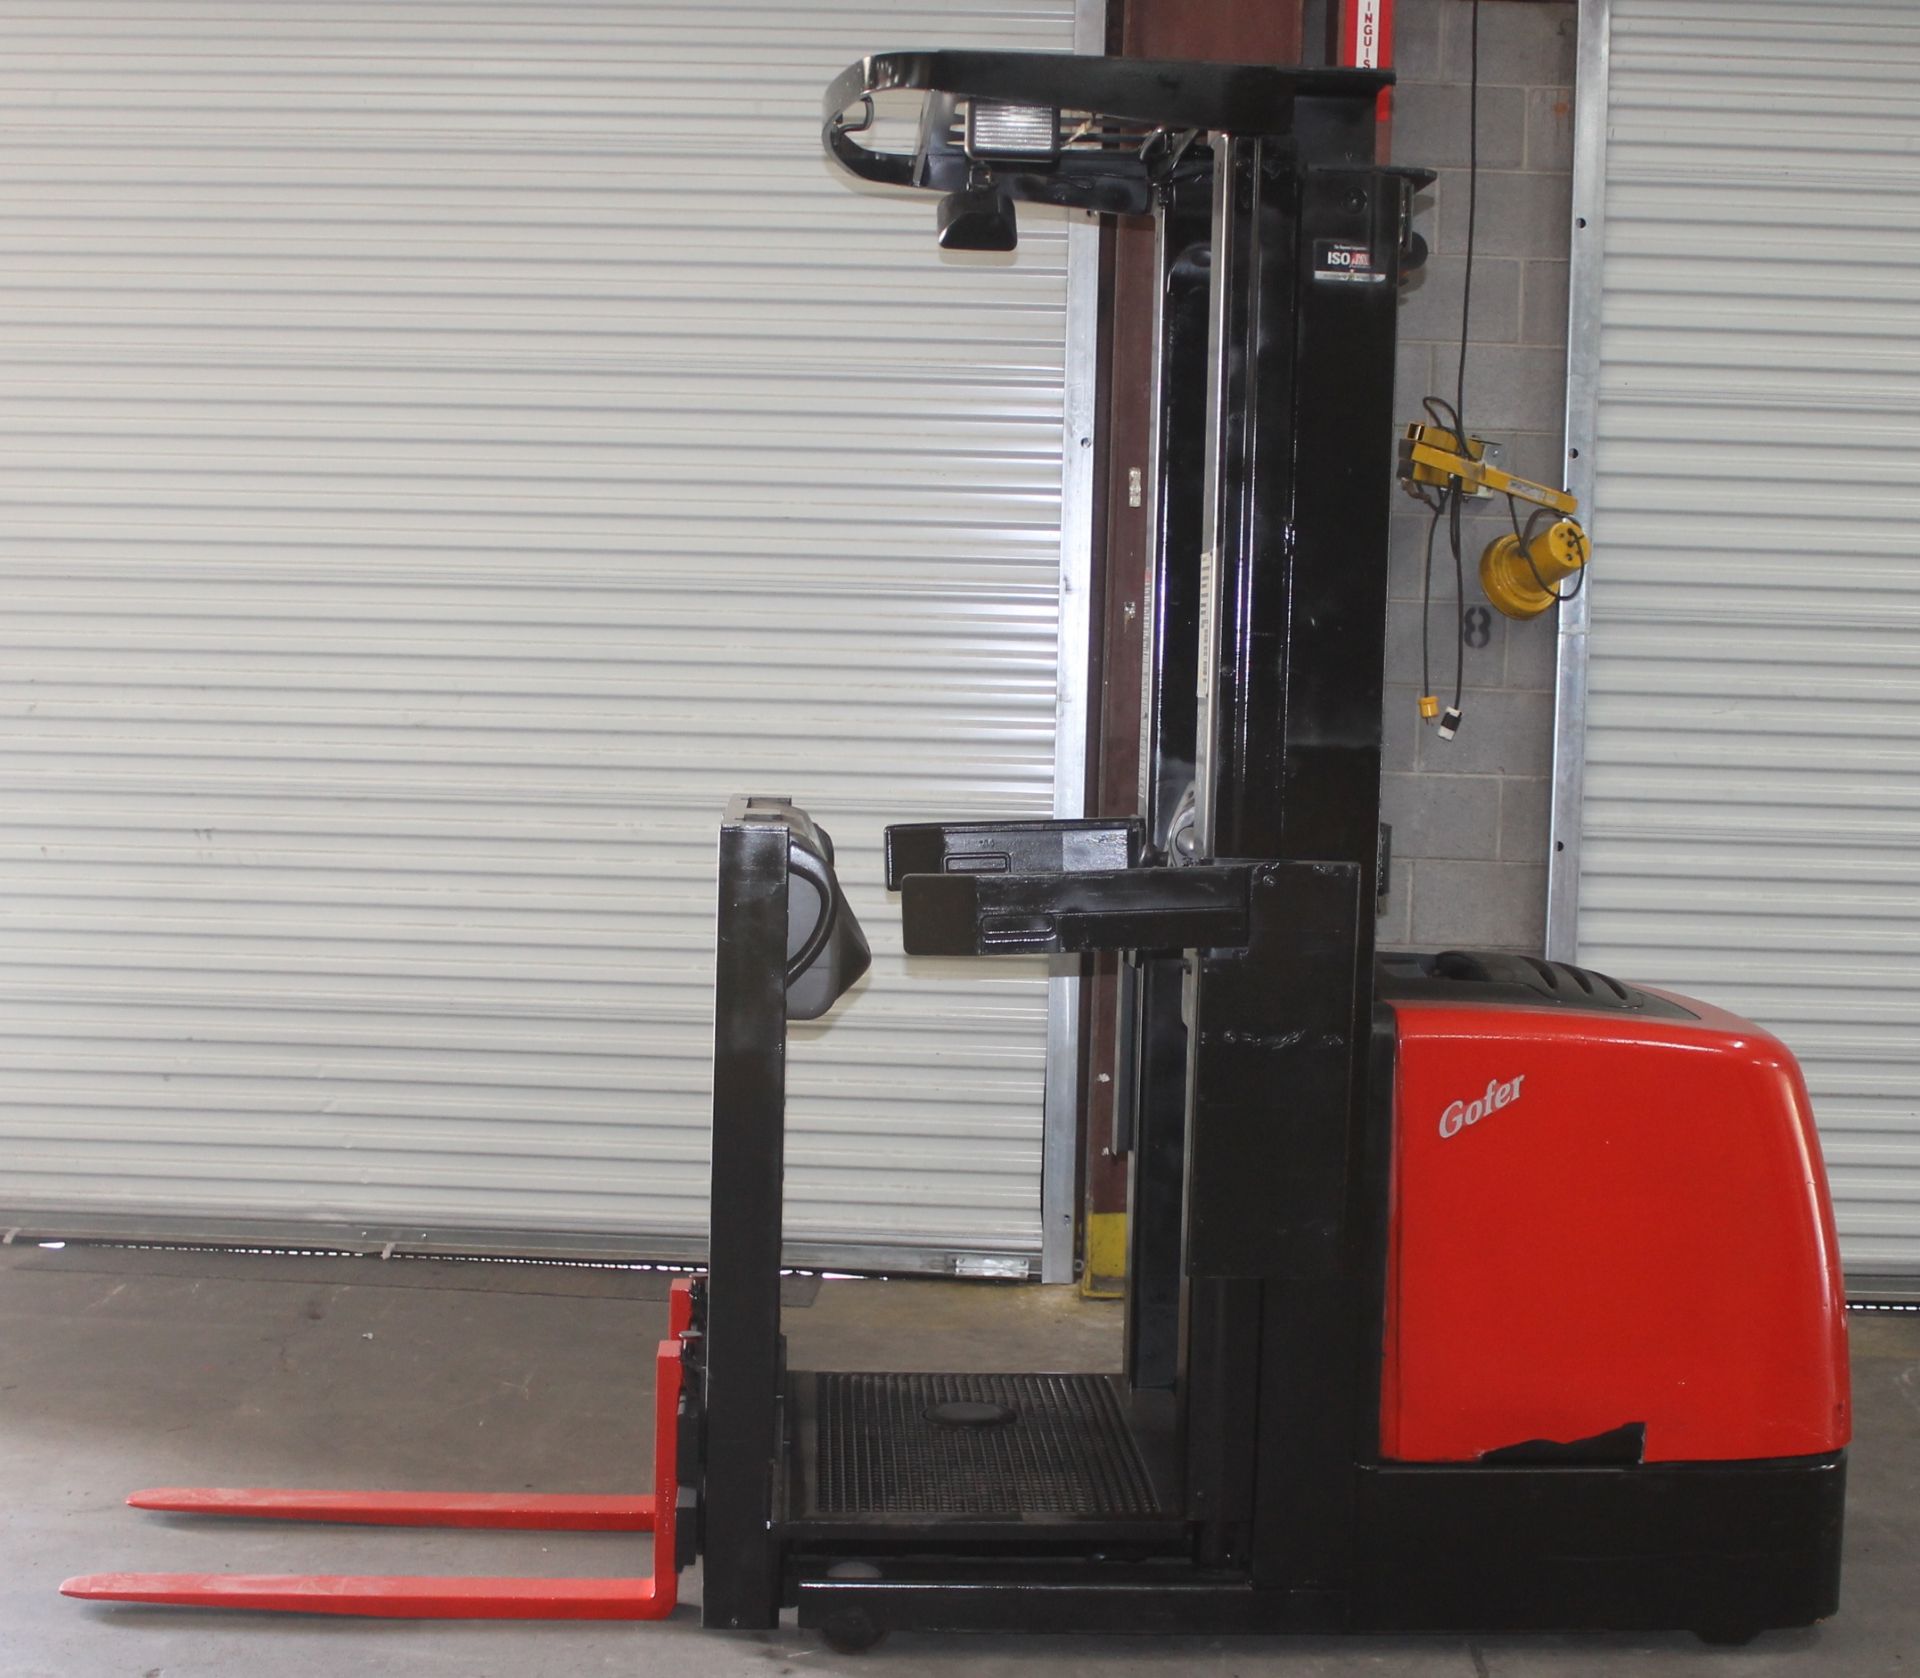 2003 RAYMOND ORDER PICKER WITH ERGO LIFT / MINI MAST FEATURE, CLICK HERE TO WATCH VIDEO